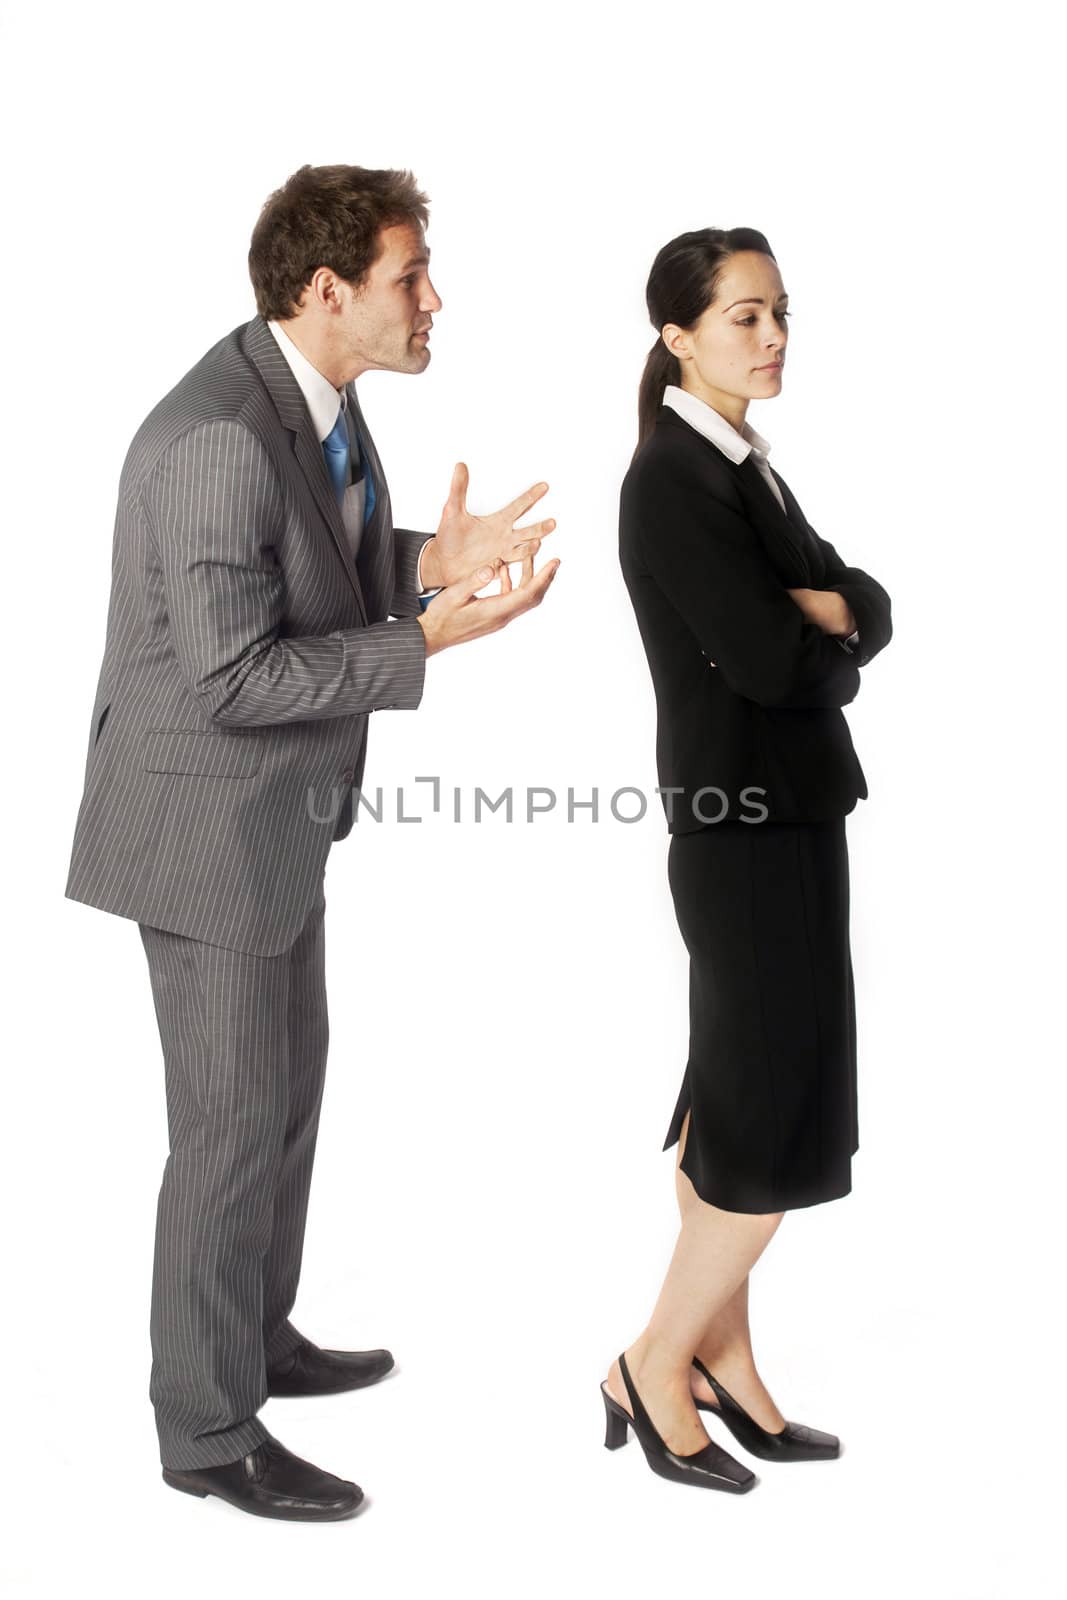 Business colleagues by hypestock